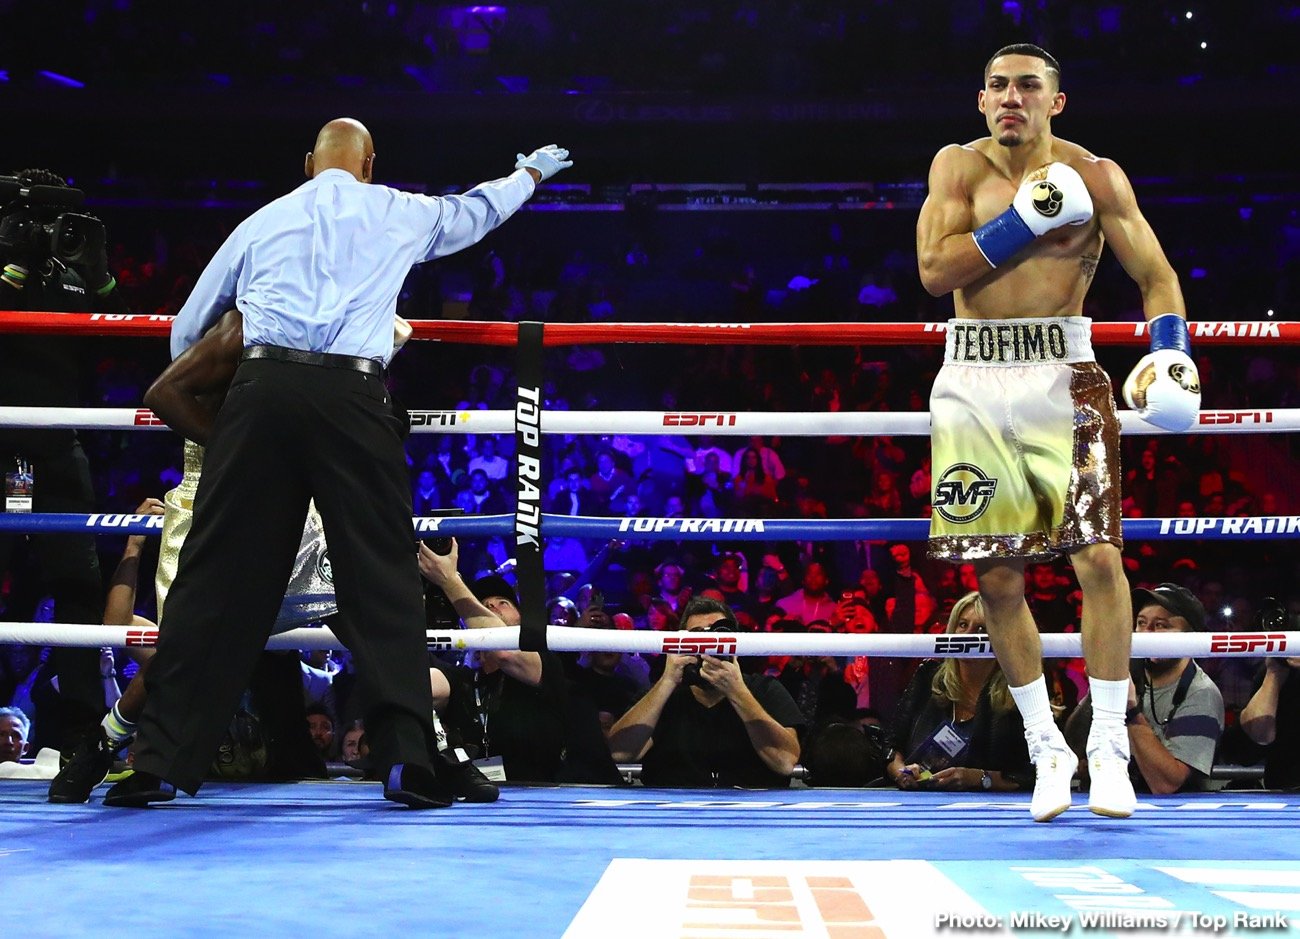 Image: Teofimo Lopez not happy with deal, Vasily Lomachenko fight in jeopardy